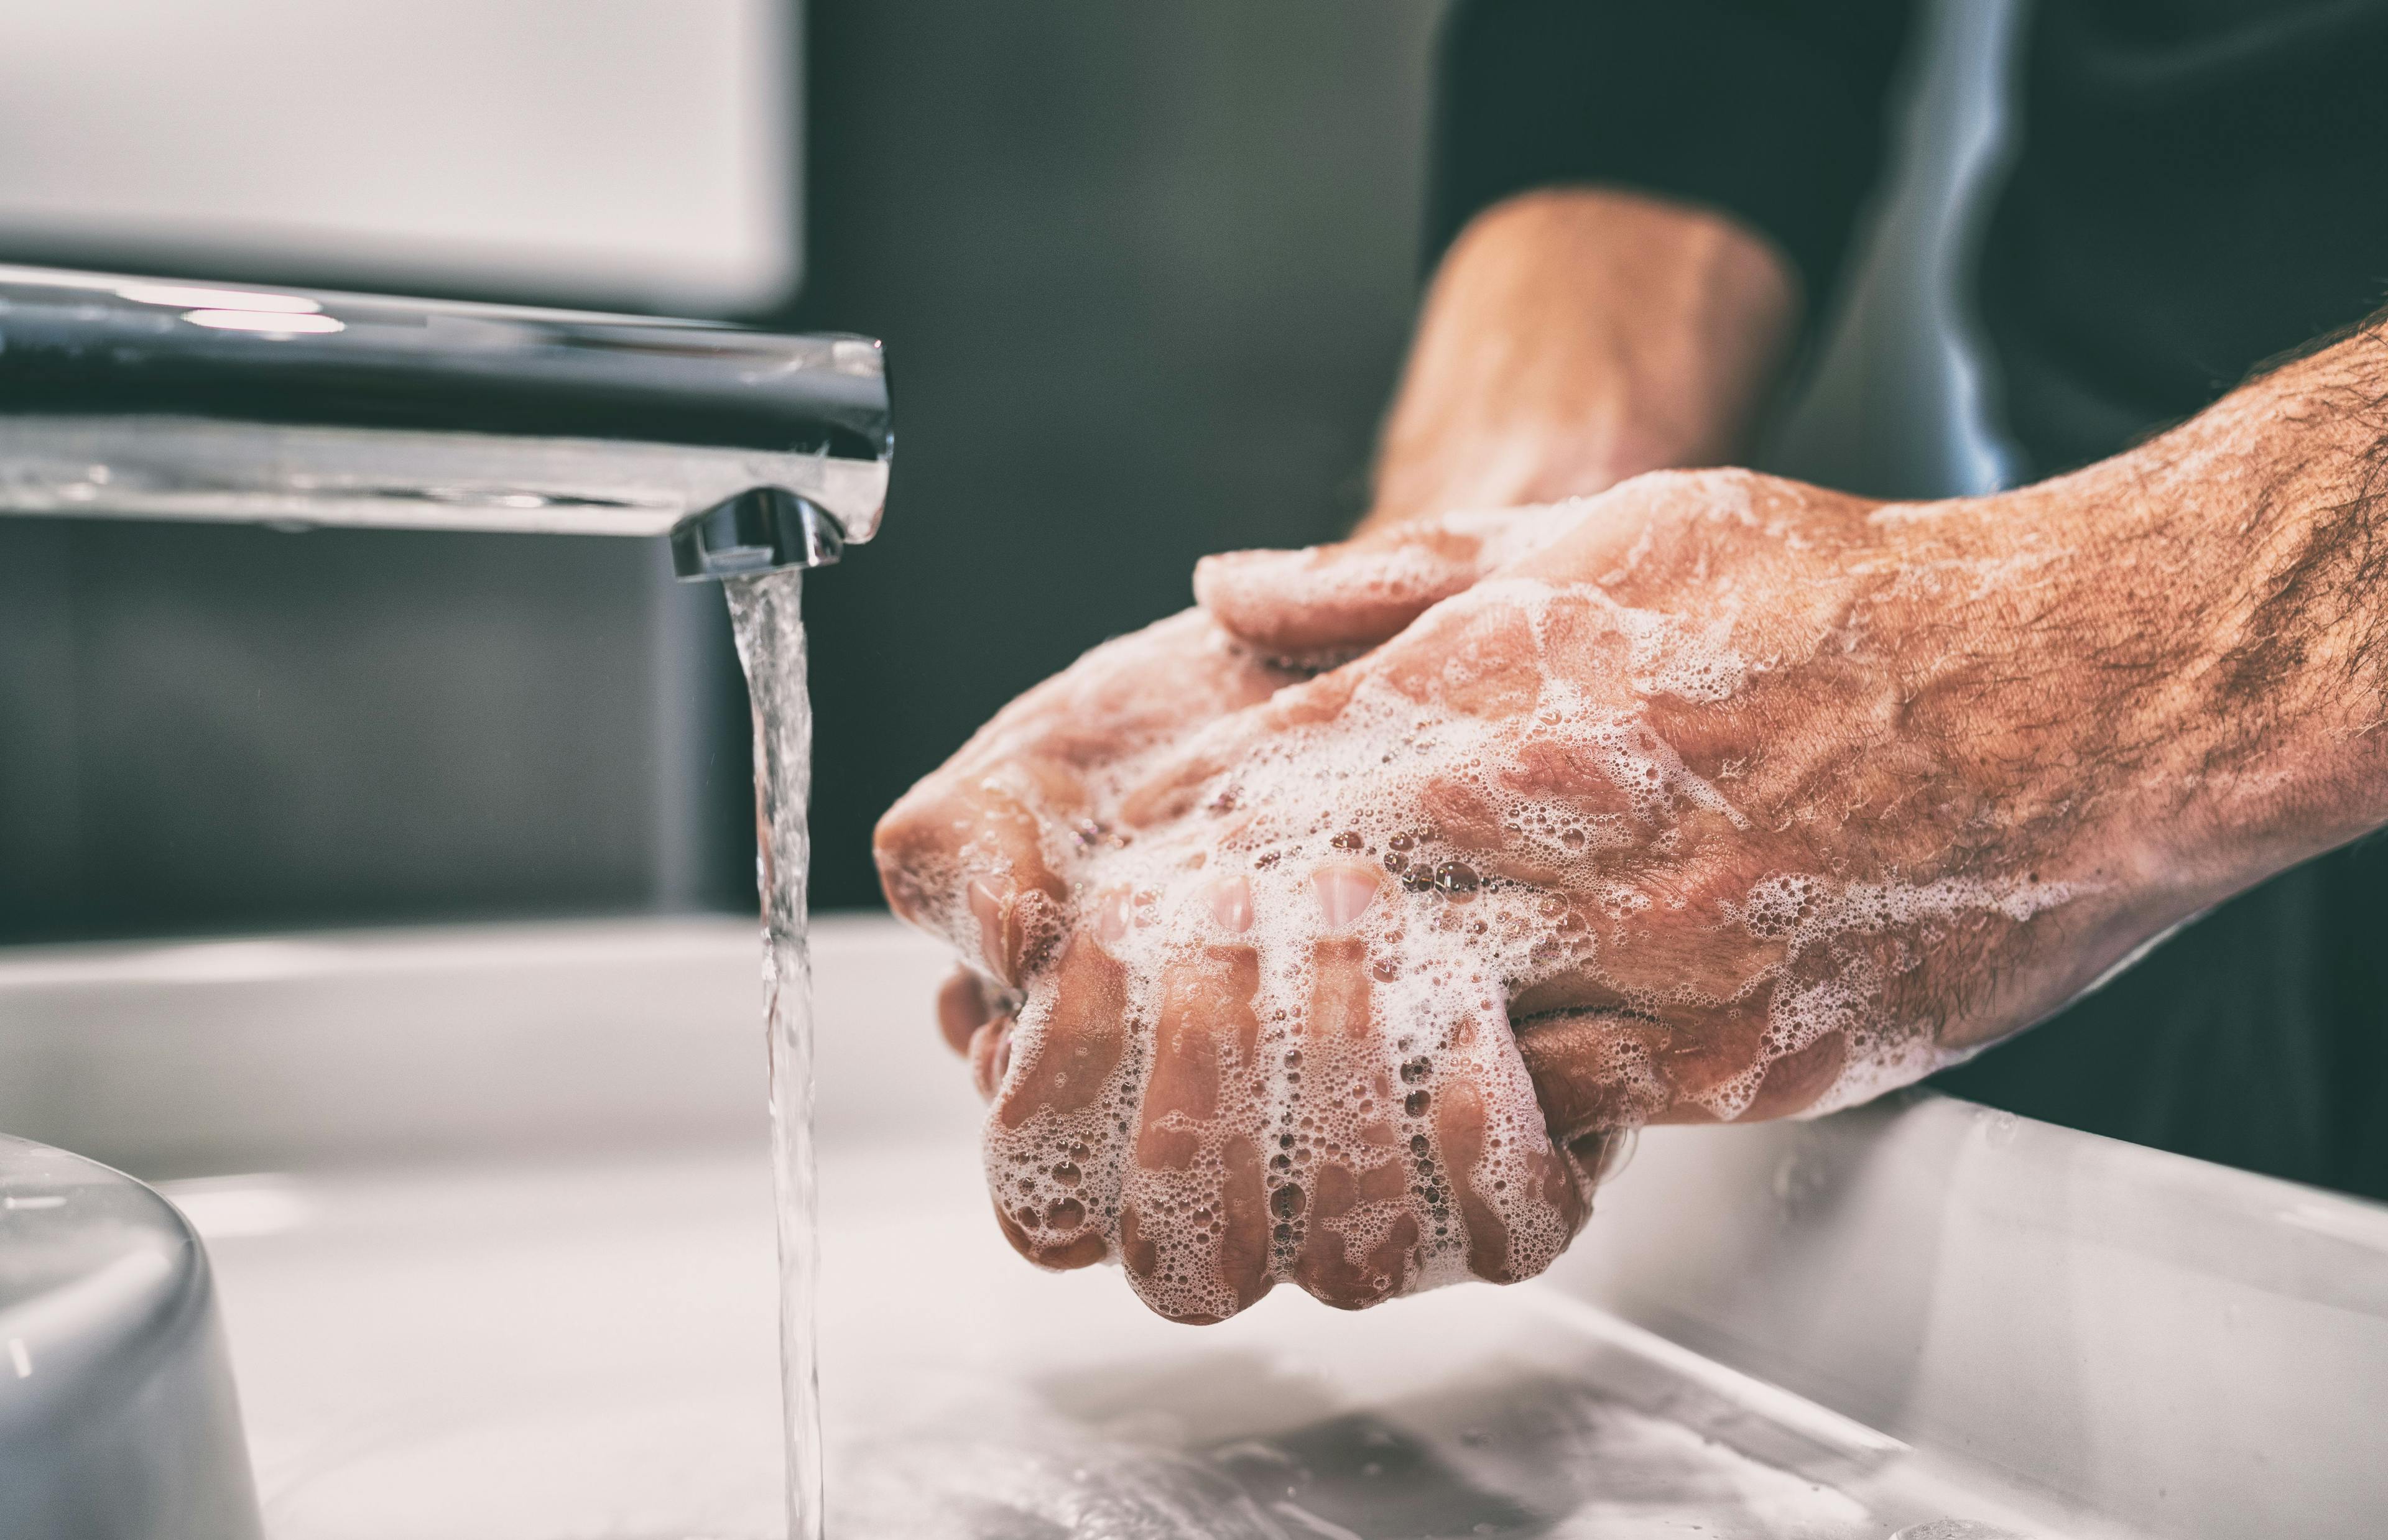 Hand hygiene recommendations during COVID-19